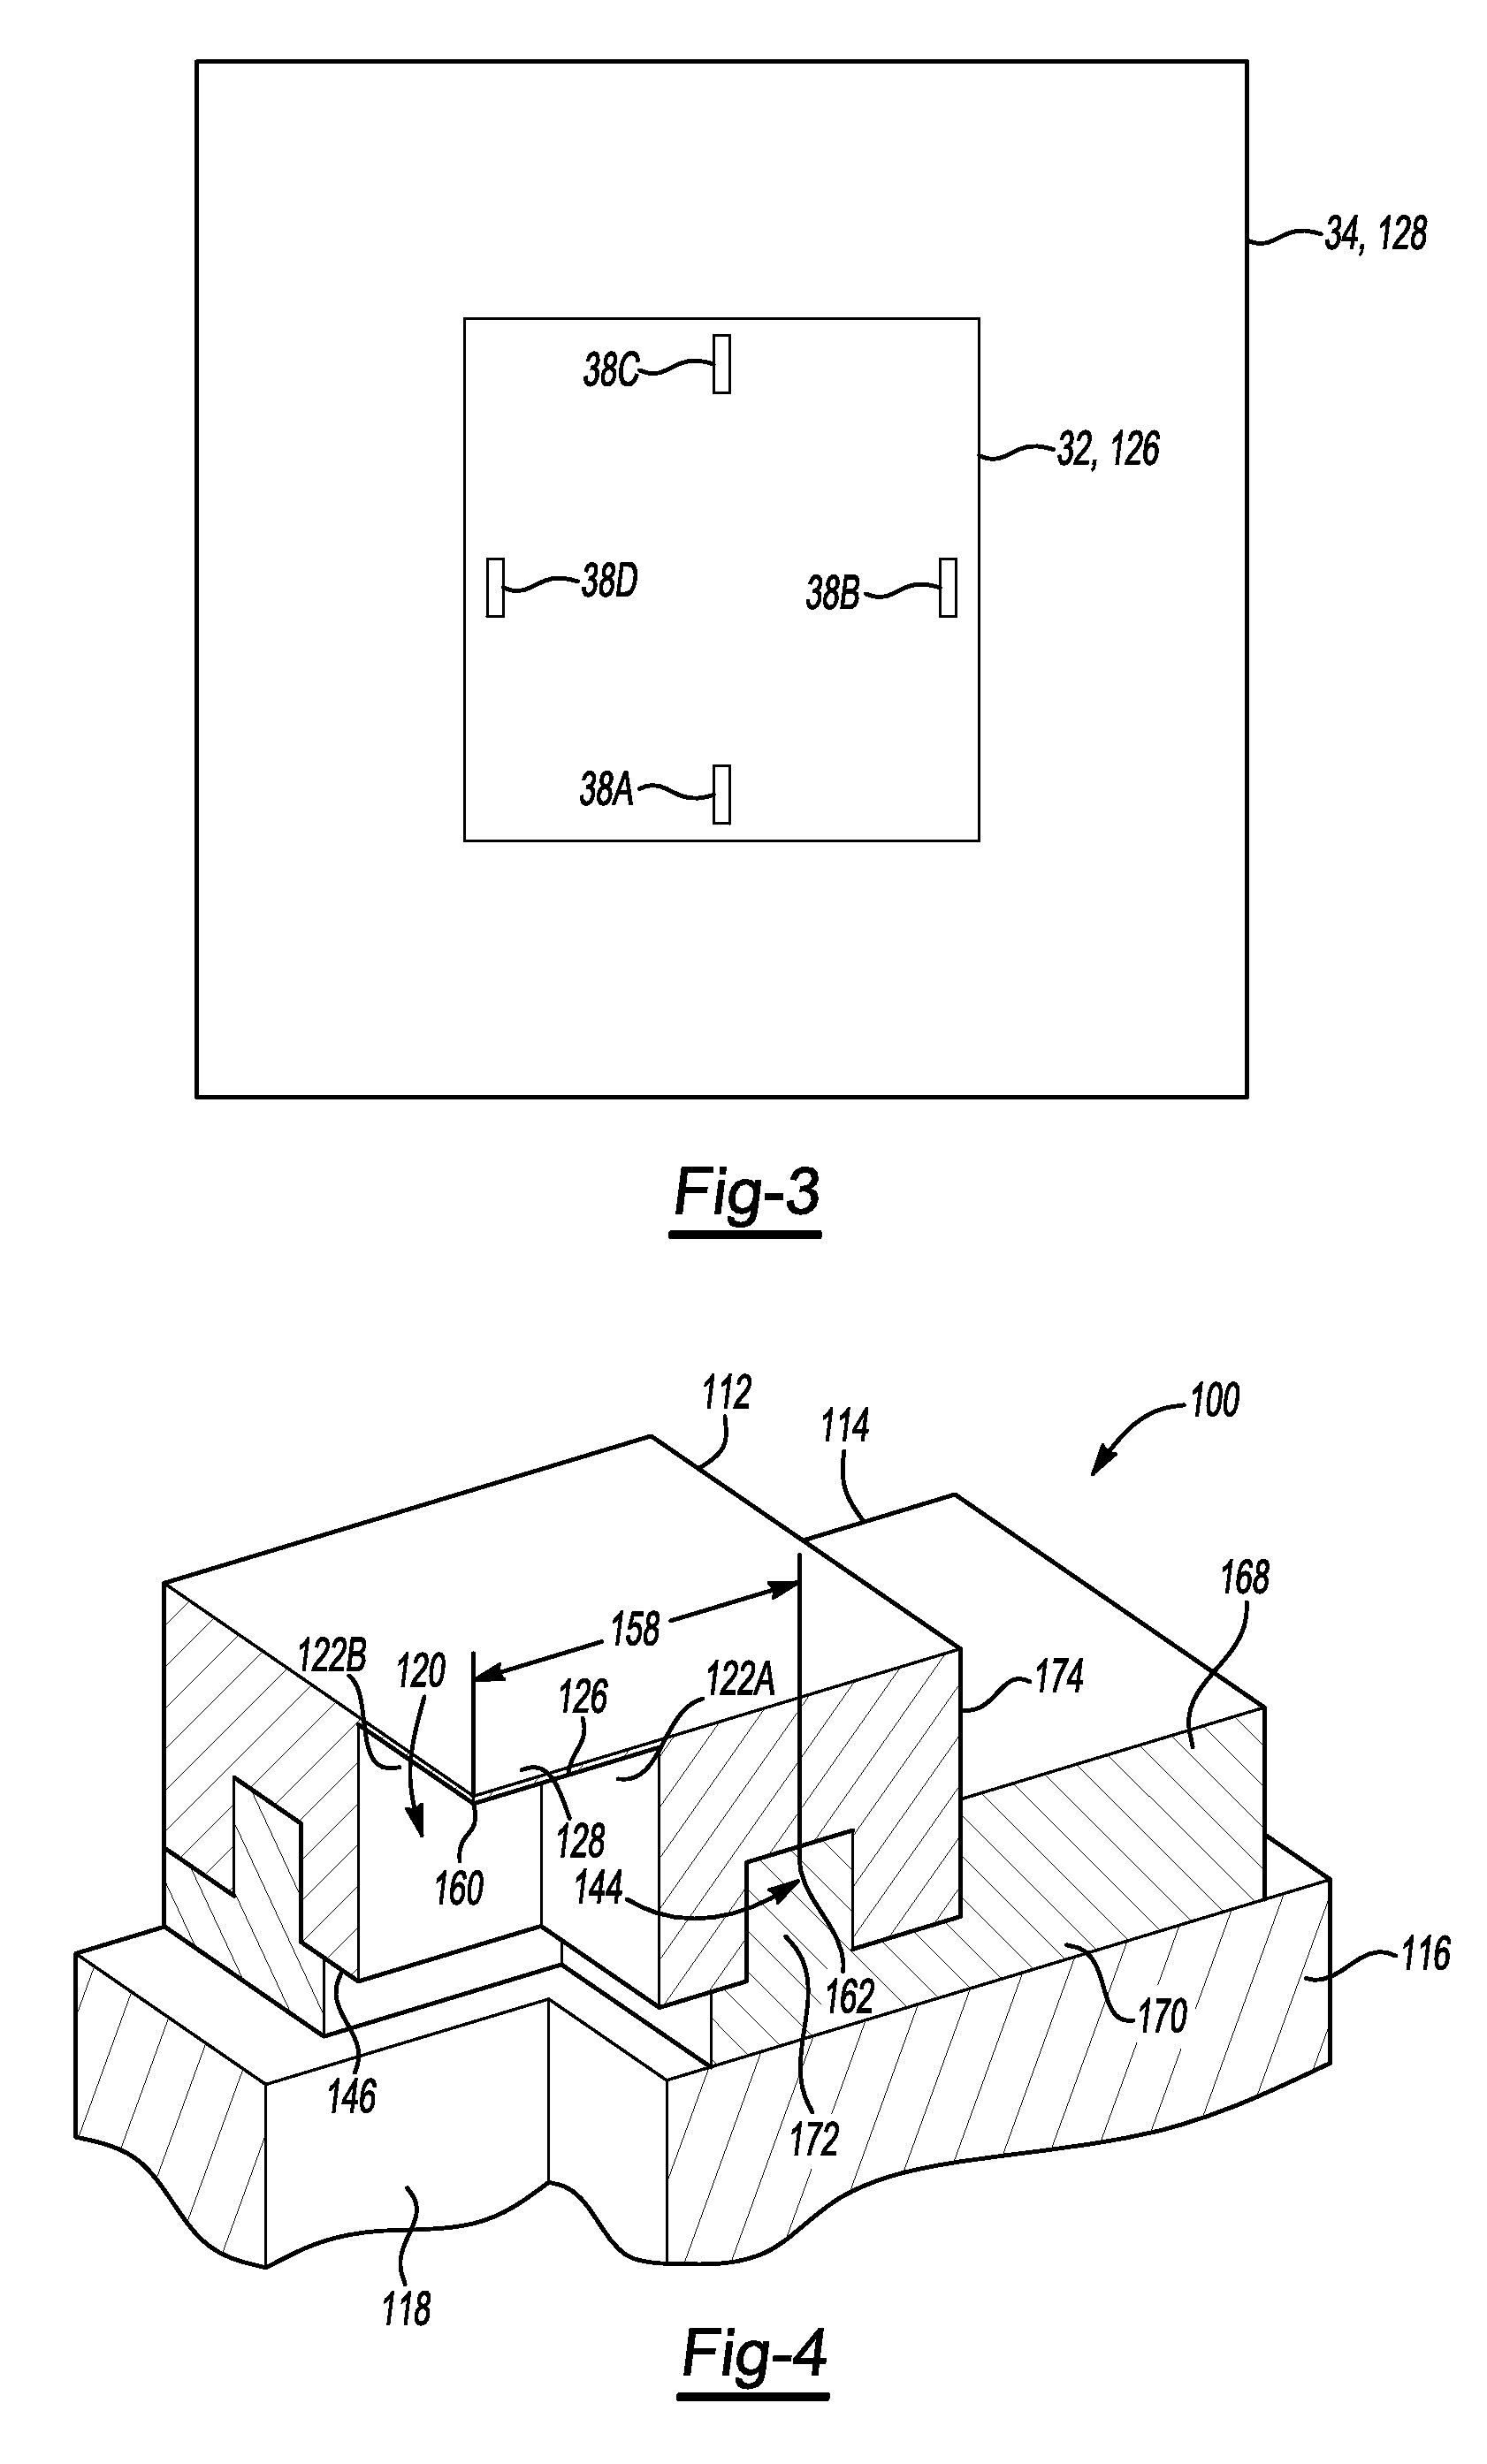 Semiconductor sensing device to minimize thermal noise